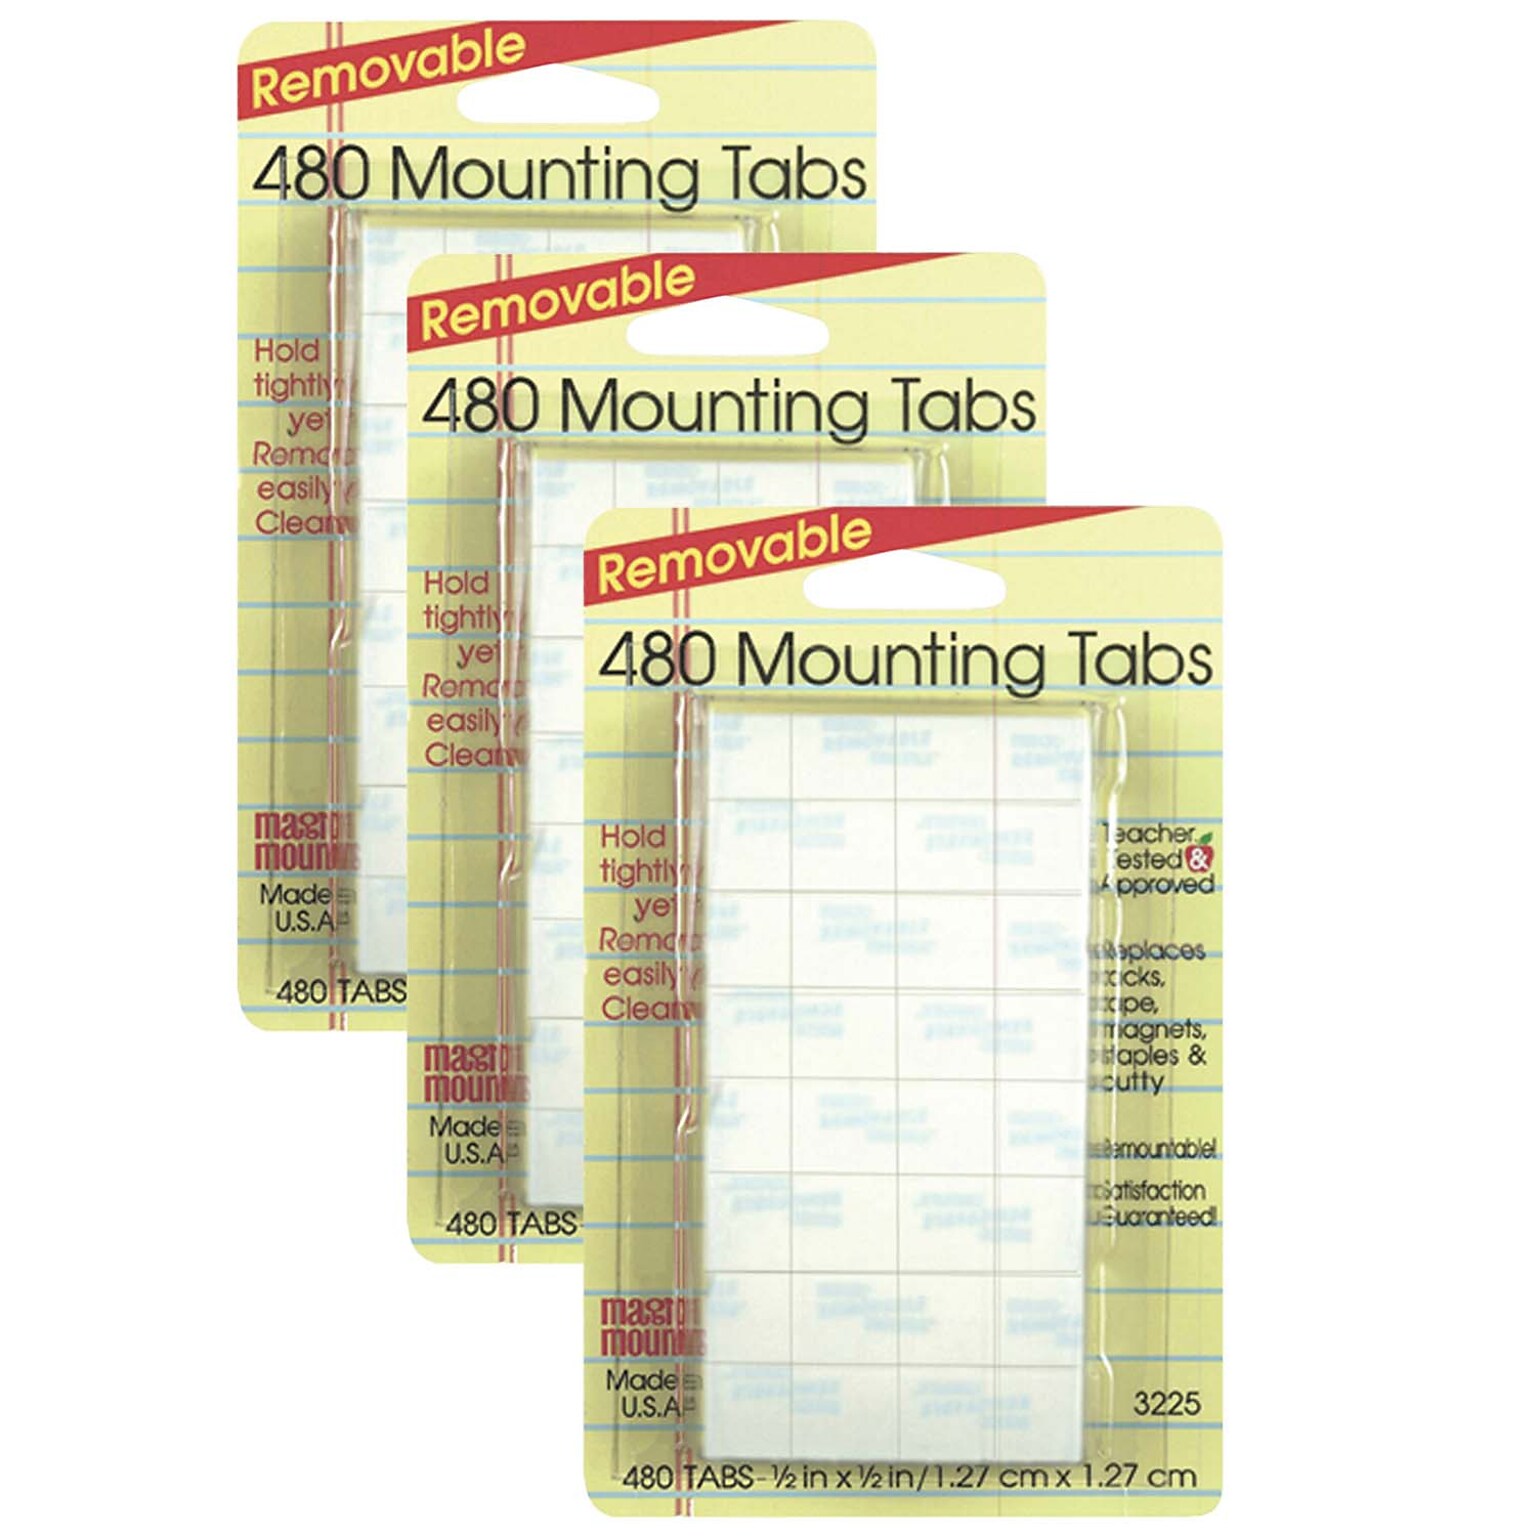 Magic Mounts Removable Tabs, 0.5 x 0.5, 480 Per Pack, 3 Packs (MIL3225-3)